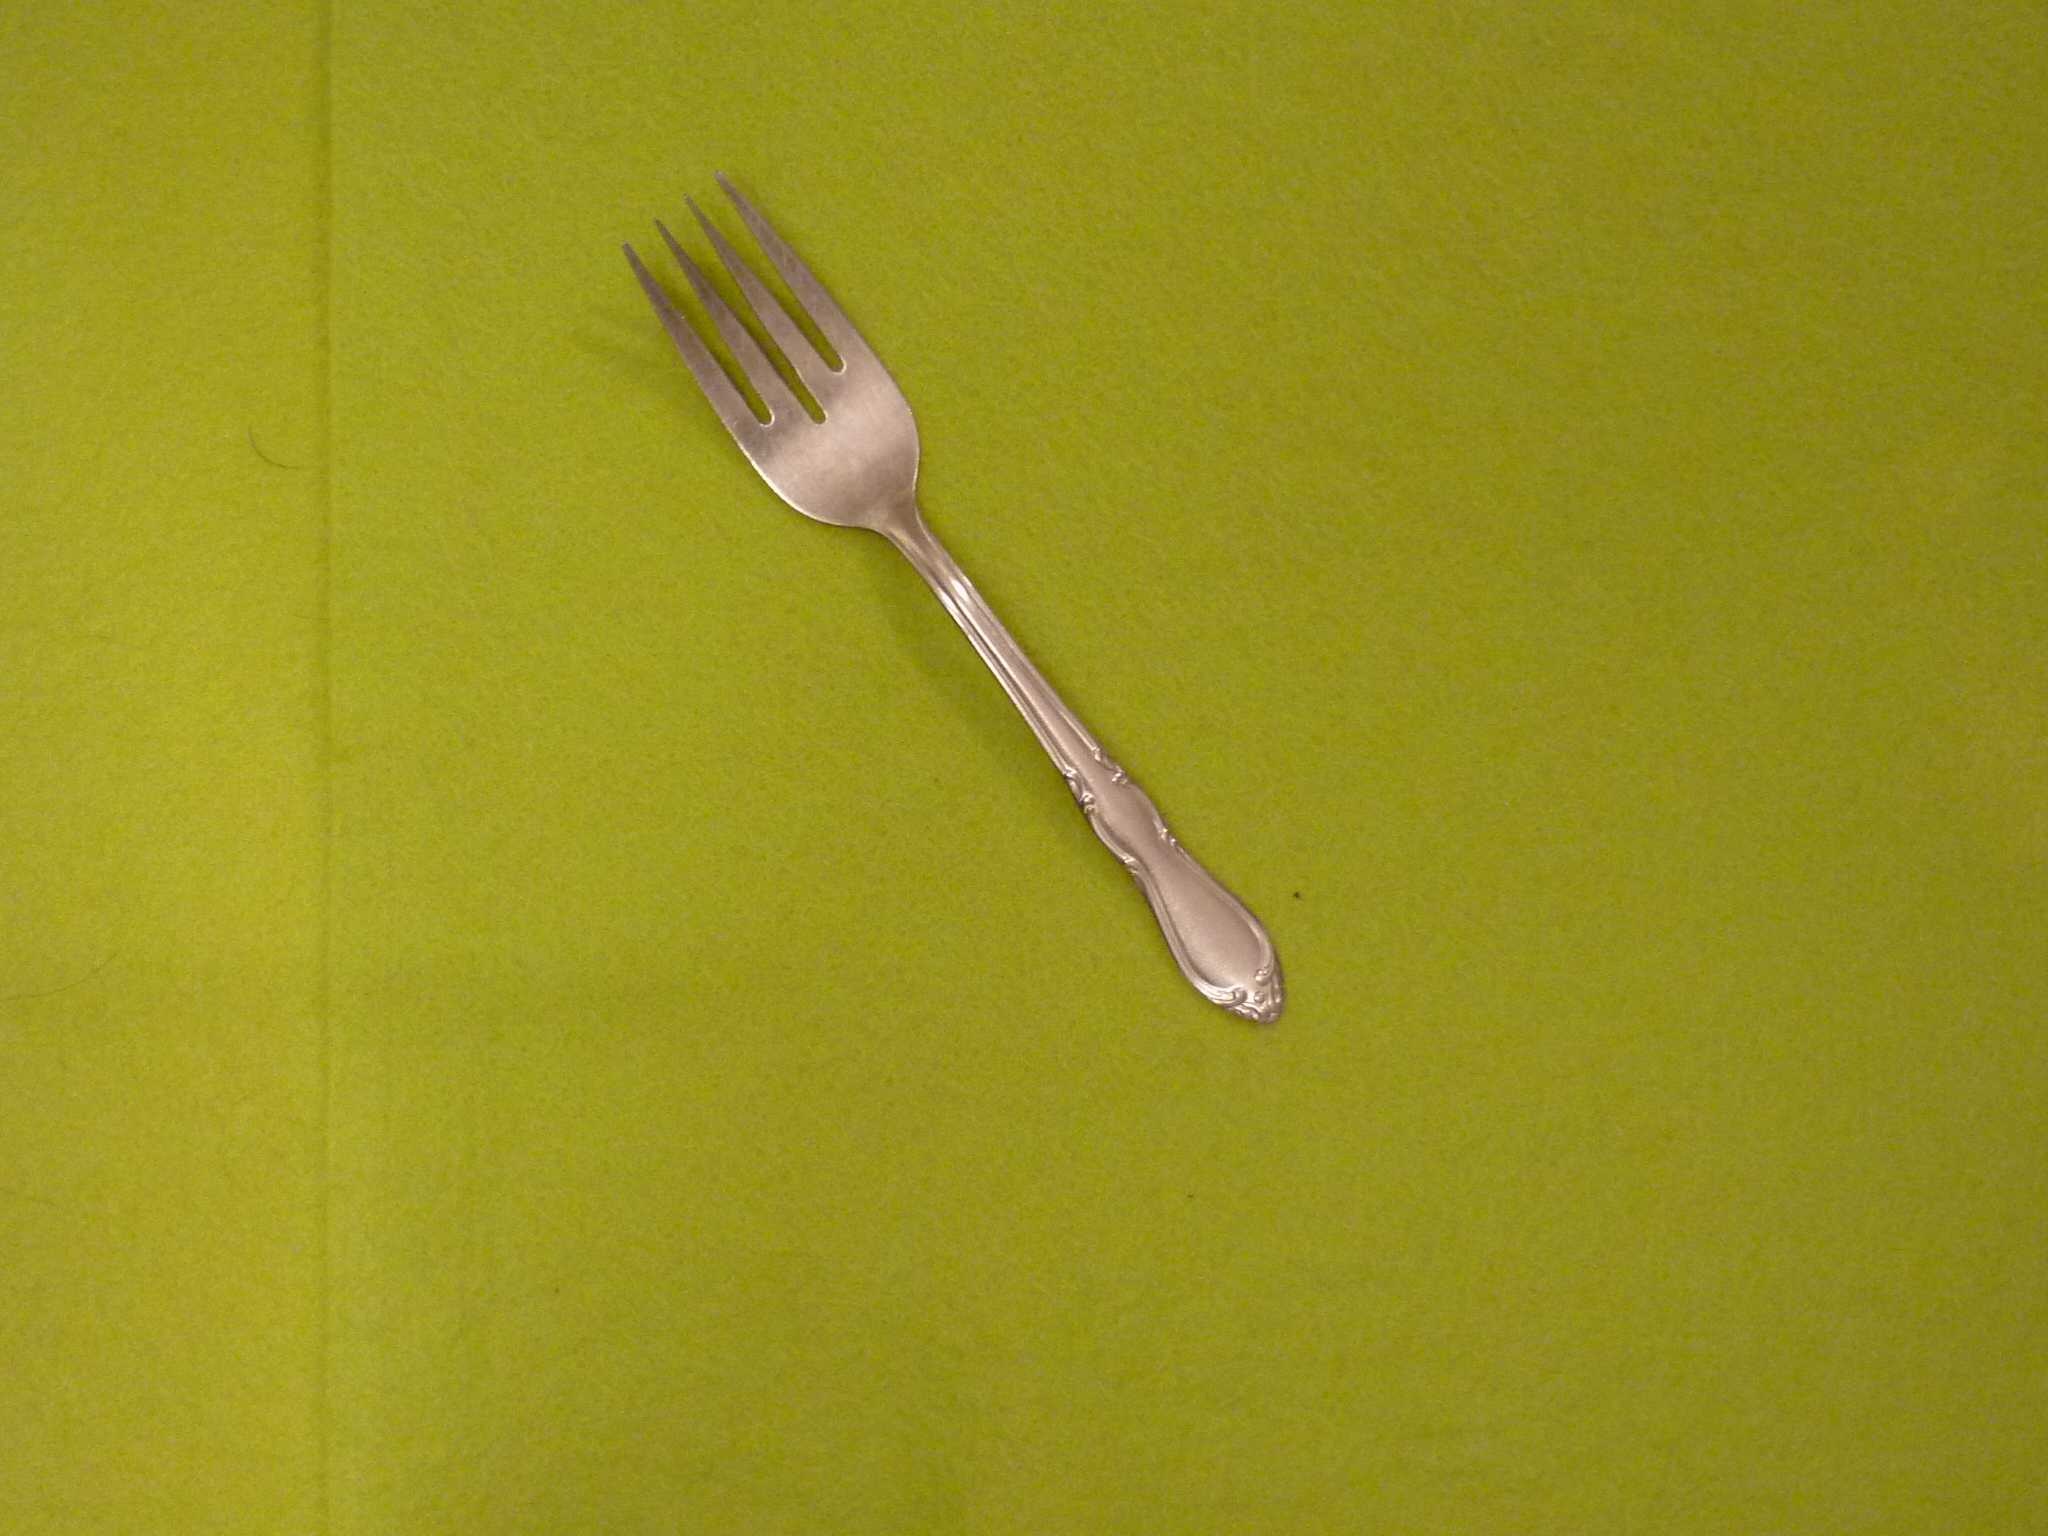 Dinner fork image classifcation dataset for machine learning